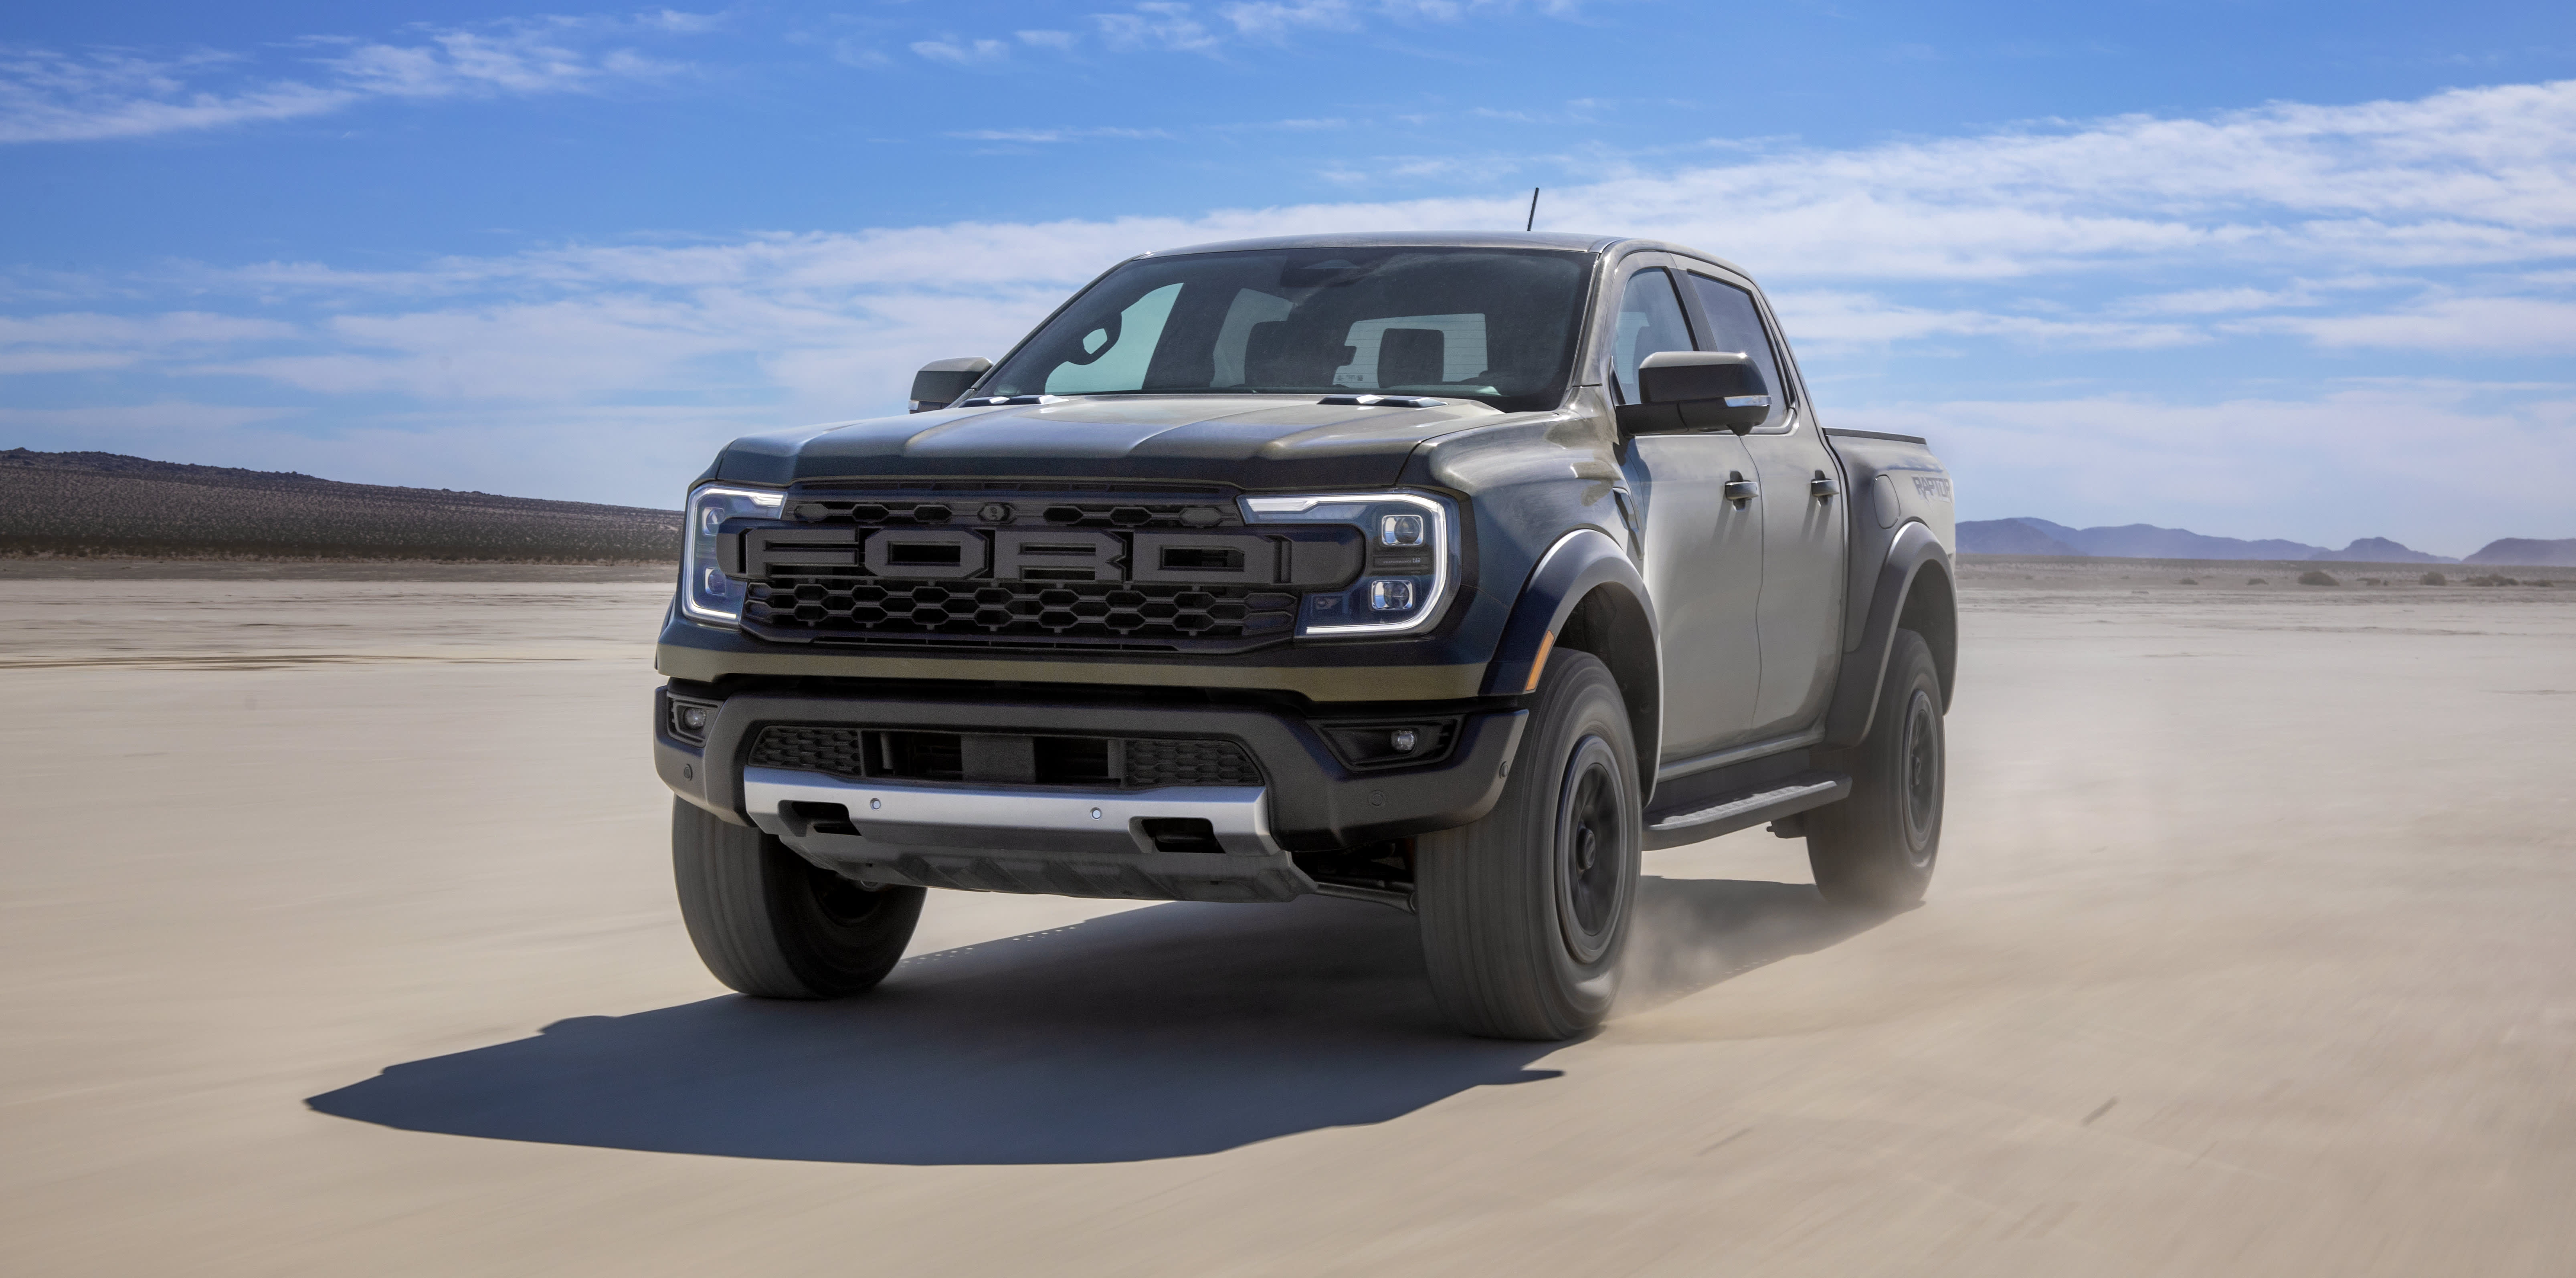 Ford unveils the redesigned Ranger with the new Raptor performance model